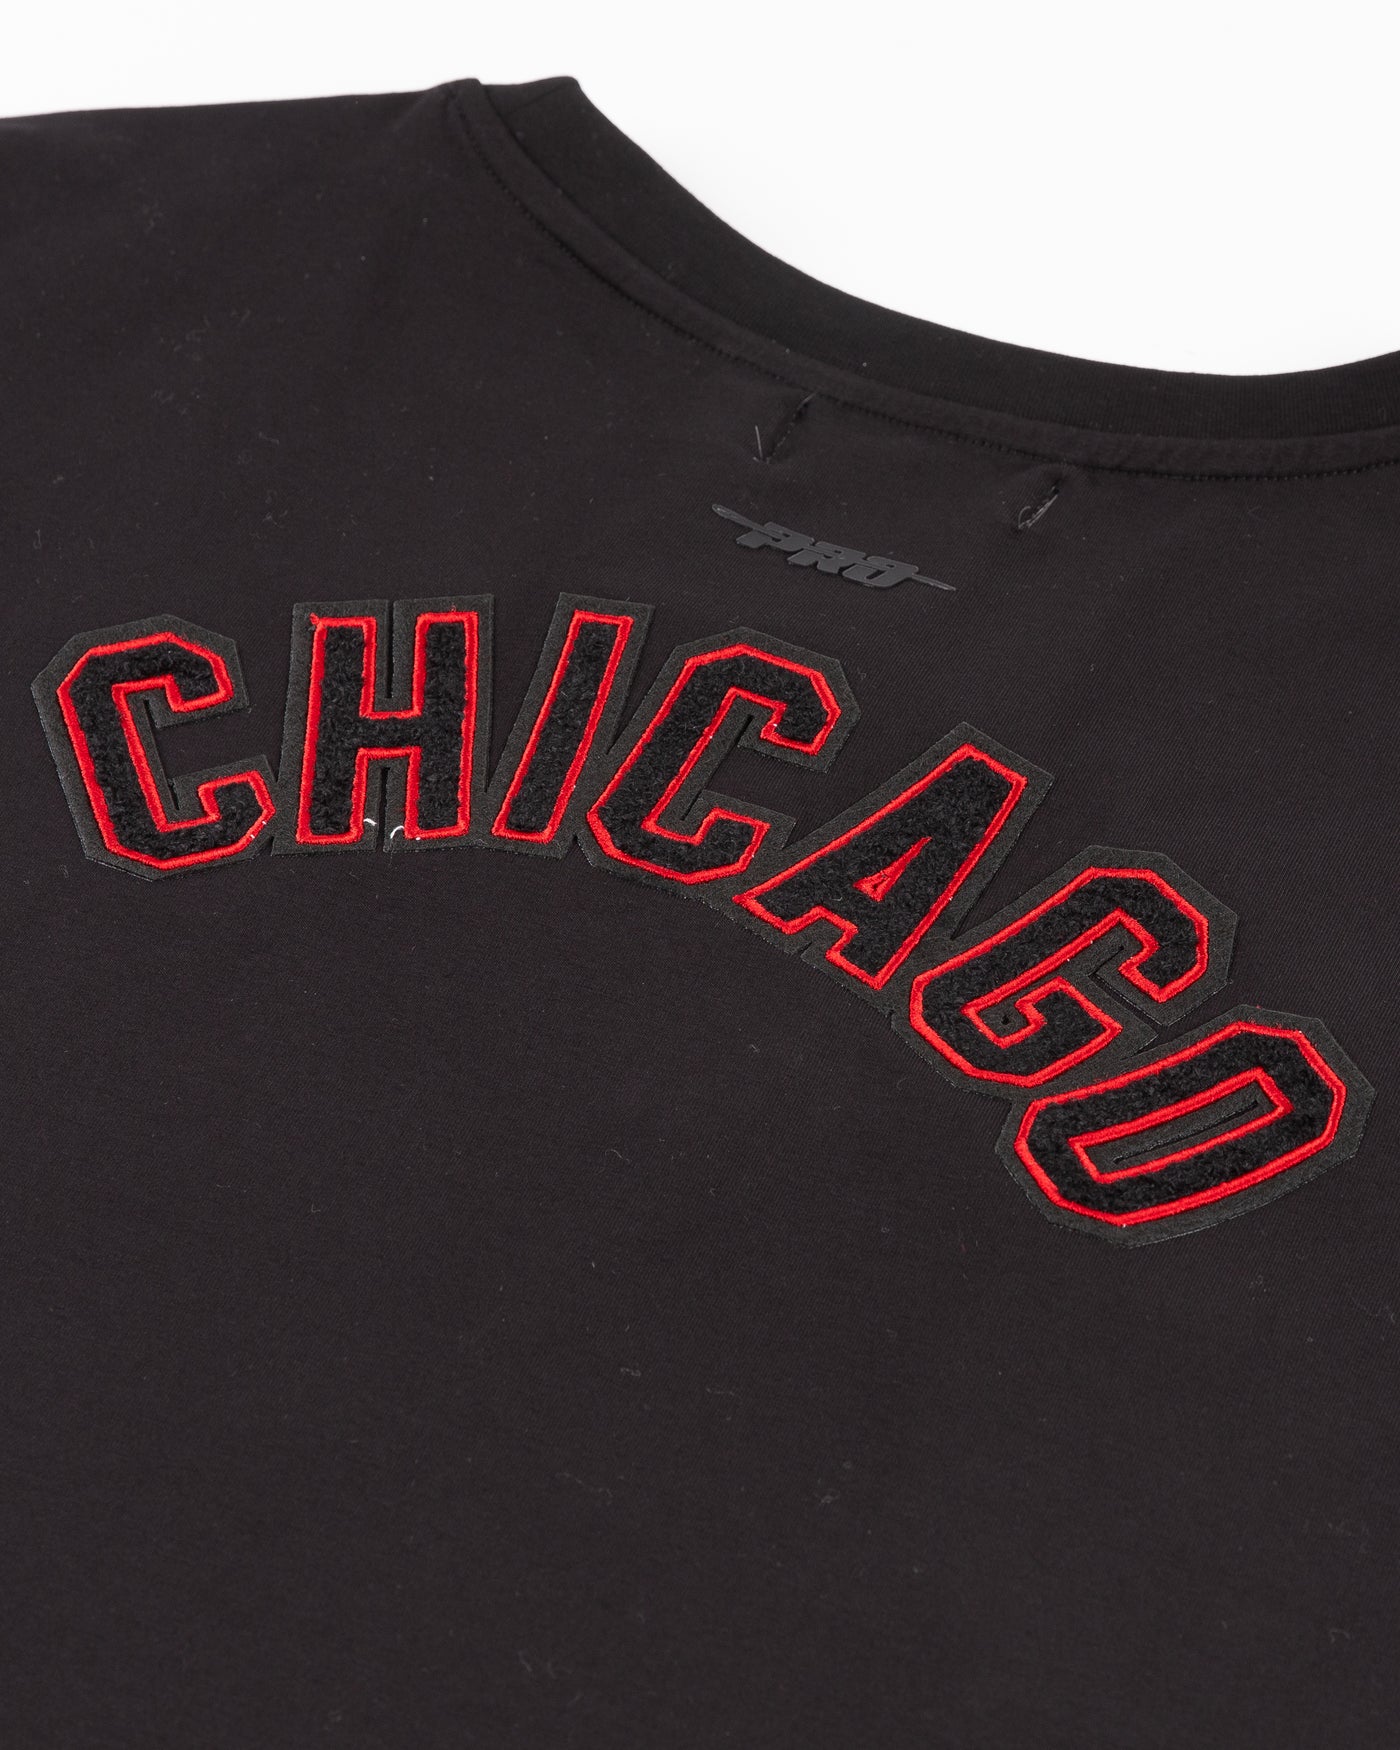 black cropped tee with embroidered Chicago Blackhawks patches on chest, shoulder and back - back lay flat